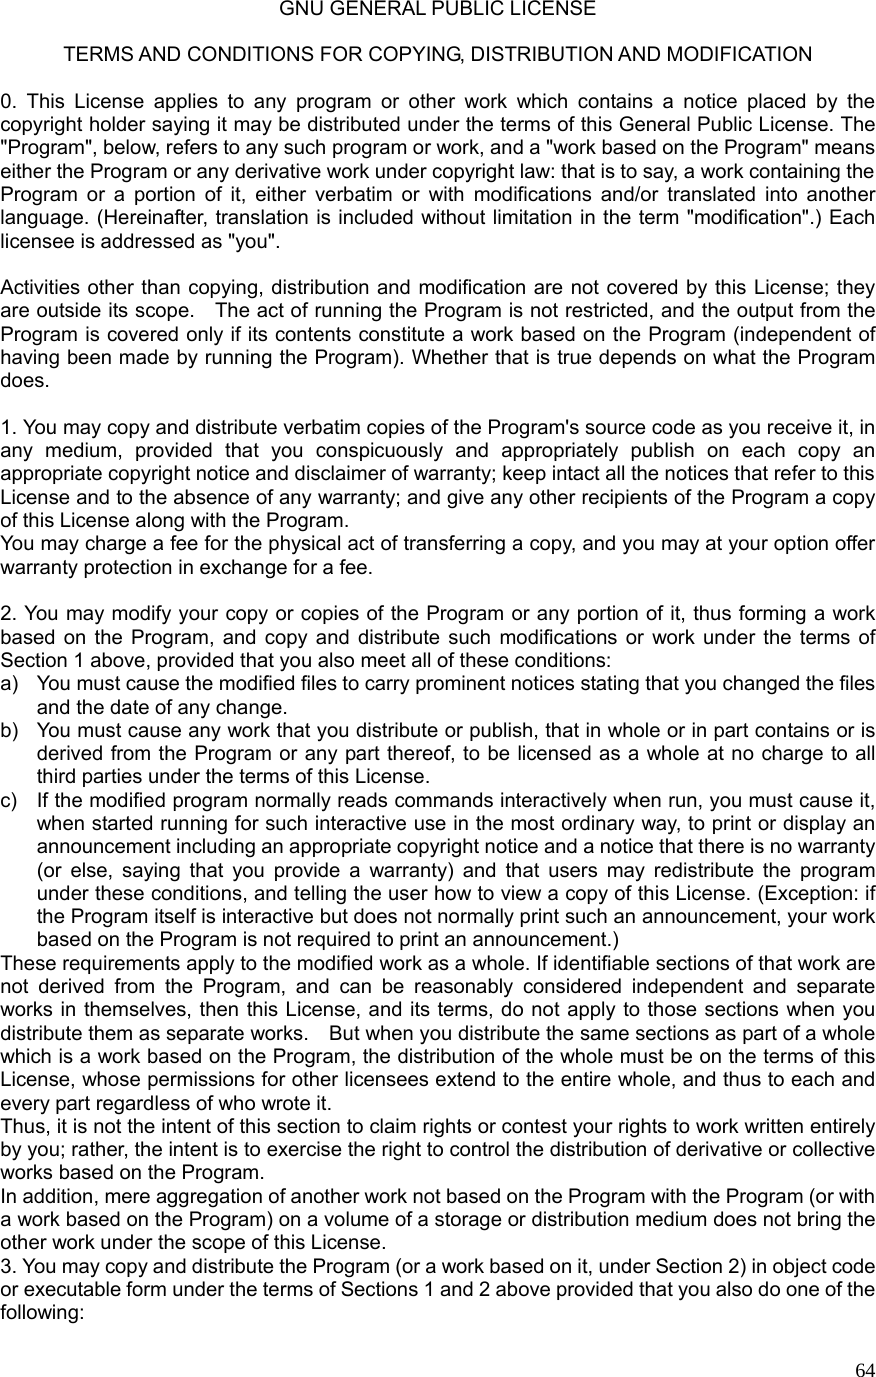  64GNU GENERAL PUBLIC LICENSE  TERMS AND CONDITIONS FOR COPYING, DISTRIBUTION AND MODIFICATION  0. This License applies to any program or other work which contains a notice placed by the copyright holder saying it may be distributed under the terms of this General Public License. The &quot;Program&quot;, below, refers to any such program or work, and a &quot;work based on the Program&quot; means either the Program or any derivative work under copyright law: that is to say, a work containing the Program or a portion of it, either verbatim or with modifications and/or translated into another language. (Hereinafter, translation is included without limitation in the term &quot;modification&quot;.) Each licensee is addressed as &quot;you&quot;.  Activities other than copying, distribution and modification are not covered by this License; they are outside its scope.    The act of running the Program is not restricted, and the output from the Program is covered only if its contents constitute a work based on the Program (independent of having been made by running the Program). Whether that is true depends on what the Program does.  1. You may copy and distribute verbatim copies of the Program&apos;s source code as you receive it, in any medium, provided that you conspicuously and appropriately publish on each copy an appropriate copyright notice and disclaimer of warranty; keep intact all the notices that refer to this License and to the absence of any warranty; and give any other recipients of the Program a copy of this License along with the Program. You may charge a fee for the physical act of transferring a copy, and you may at your option offer warranty protection in exchange for a fee.  2. You may modify your copy or copies of the Program or any portion of it, thus forming a work based on the Program, and copy and distribute such modifications or work under the terms of Section 1 above, provided that you also meet all of these conditions: a)  You must cause the modified files to carry prominent notices stating that you changed the files and the date of any change. b)  You must cause any work that you distribute or publish, that in whole or in part contains or is derived from the Program or any part thereof, to be licensed as a whole at no charge to all third parties under the terms of this License. c)  If the modified program normally reads commands interactively when run, you must cause it, when started running for such interactive use in the most ordinary way, to print or display an announcement including an appropriate copyright notice and a notice that there is no warranty (or else, saying that you provide a warranty) and that users may redistribute the program under these conditions, and telling the user how to view a copy of this License. (Exception: if the Program itself is interactive but does not normally print such an announcement, your work based on the Program is not required to print an announcement.) These requirements apply to the modified work as a whole. If identifiable sections of that work are not derived from the Program, and can be reasonably considered independent and separate works in themselves, then this License, and its terms, do not apply to those sections when you distribute them as separate works.    But when you distribute the same sections as part of a whole which is a work based on the Program, the distribution of the whole must be on the terms of this License, whose permissions for other licensees extend to the entire whole, and thus to each and every part regardless of who wrote it. Thus, it is not the intent of this section to claim rights or contest your rights to work written entirely by you; rather, the intent is to exercise the right to control the distribution of derivative or collective works based on the Program. In addition, mere aggregation of another work not based on the Program with the Program (or with a work based on the Program) on a volume of a storage or distribution medium does not bring the other work under the scope of this License. 3. You may copy and distribute the Program (or a work based on it, under Section 2) in object code or executable form under the terms of Sections 1 and 2 above provided that you also do one of the following: 